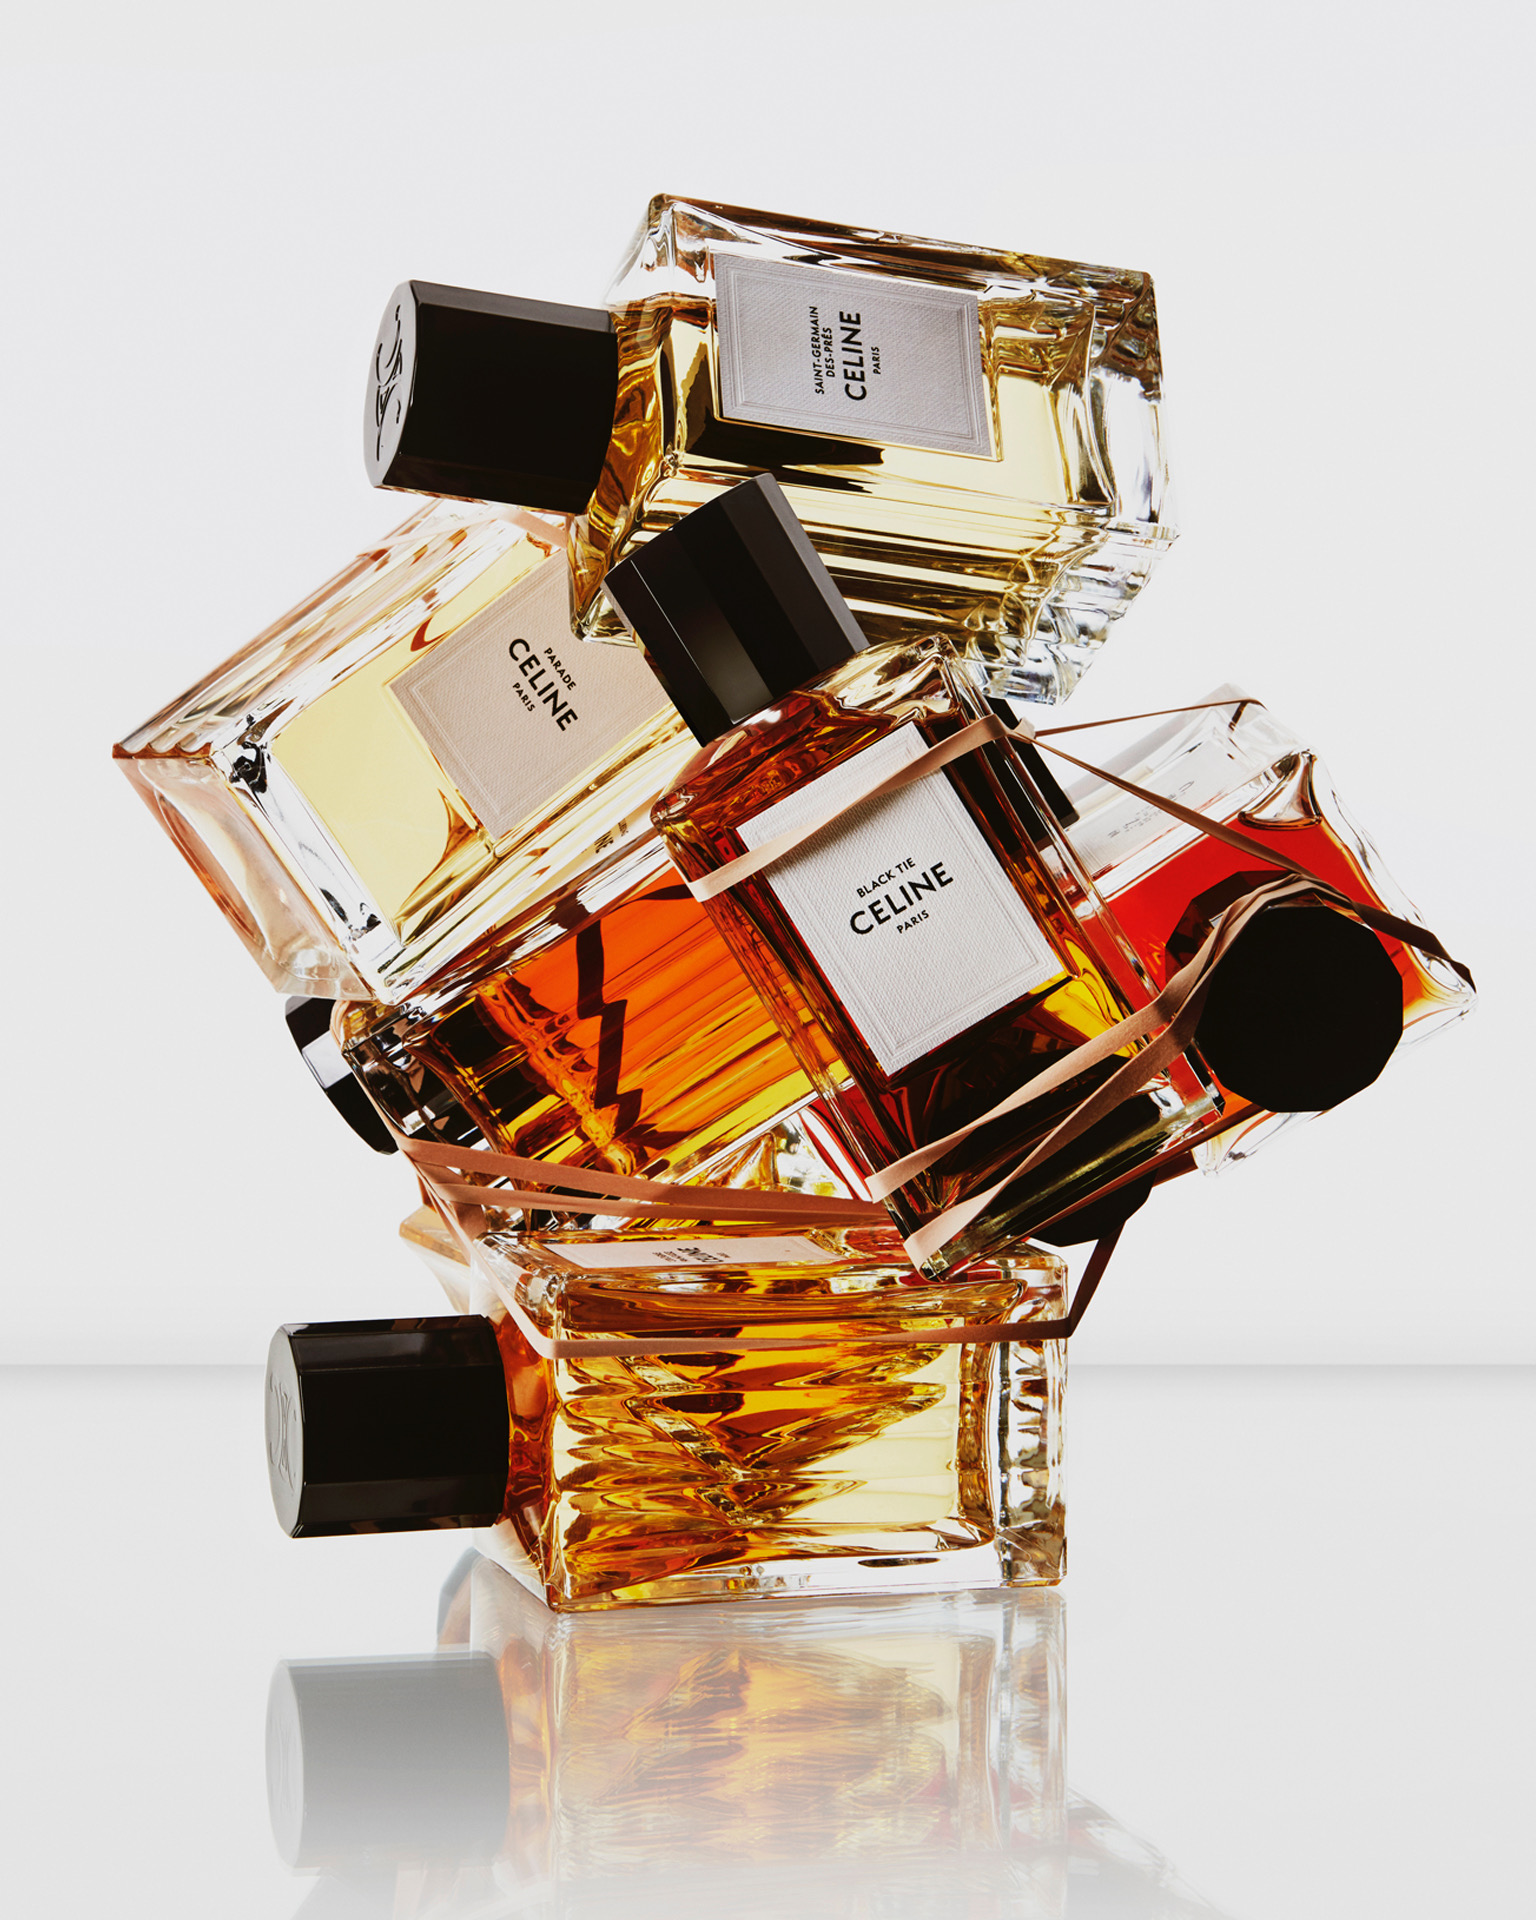 Louis Vuitton Debuts Spell on You Fragrance